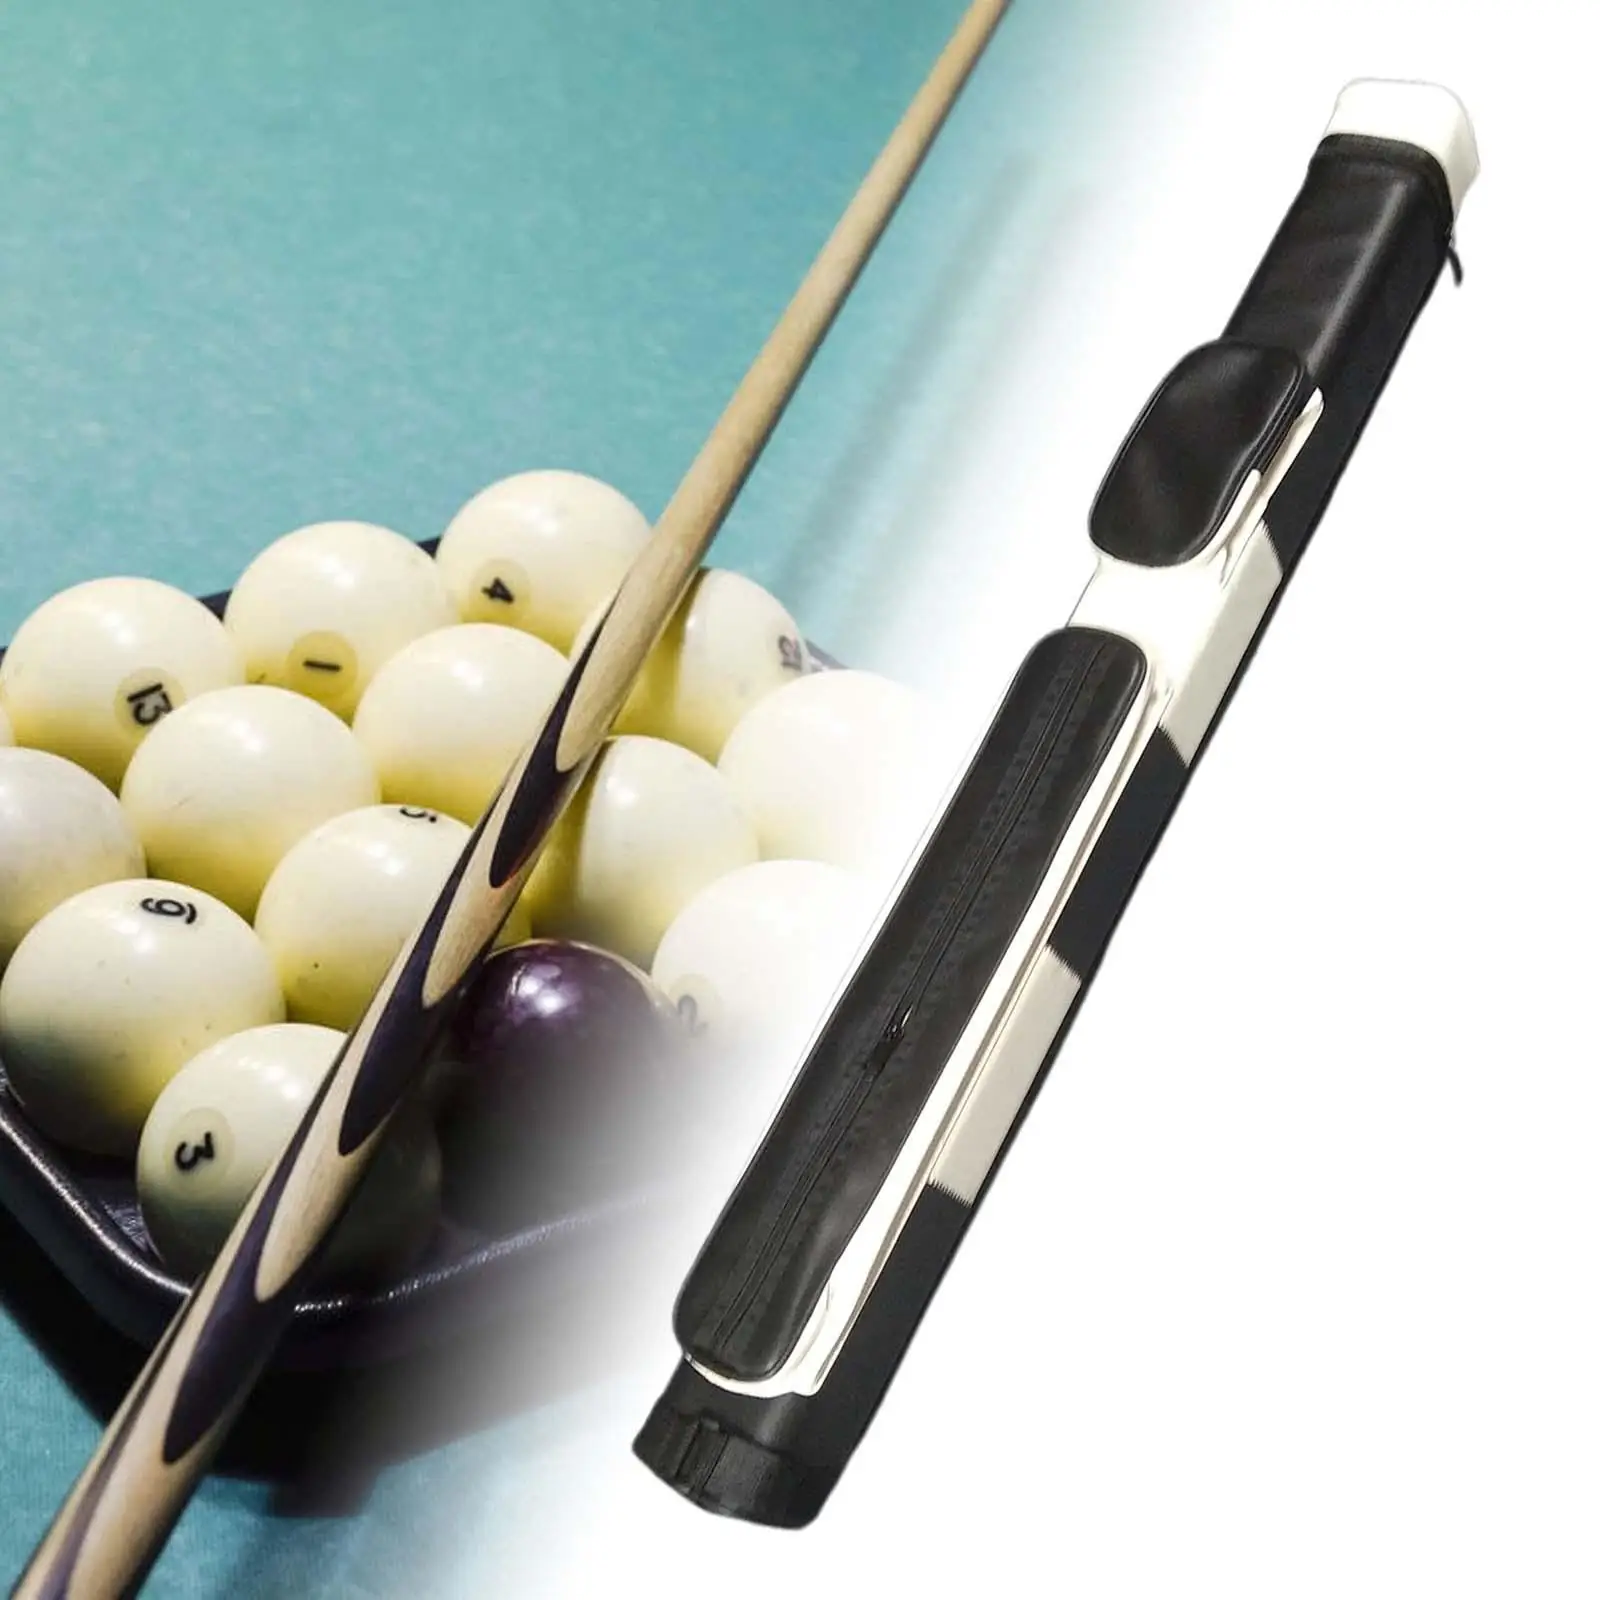 Pool Cue Case with External Pocket Hard Case Storage Box with Divider 1/2 Billiard Sticks Carrying Case Billiards Supplies